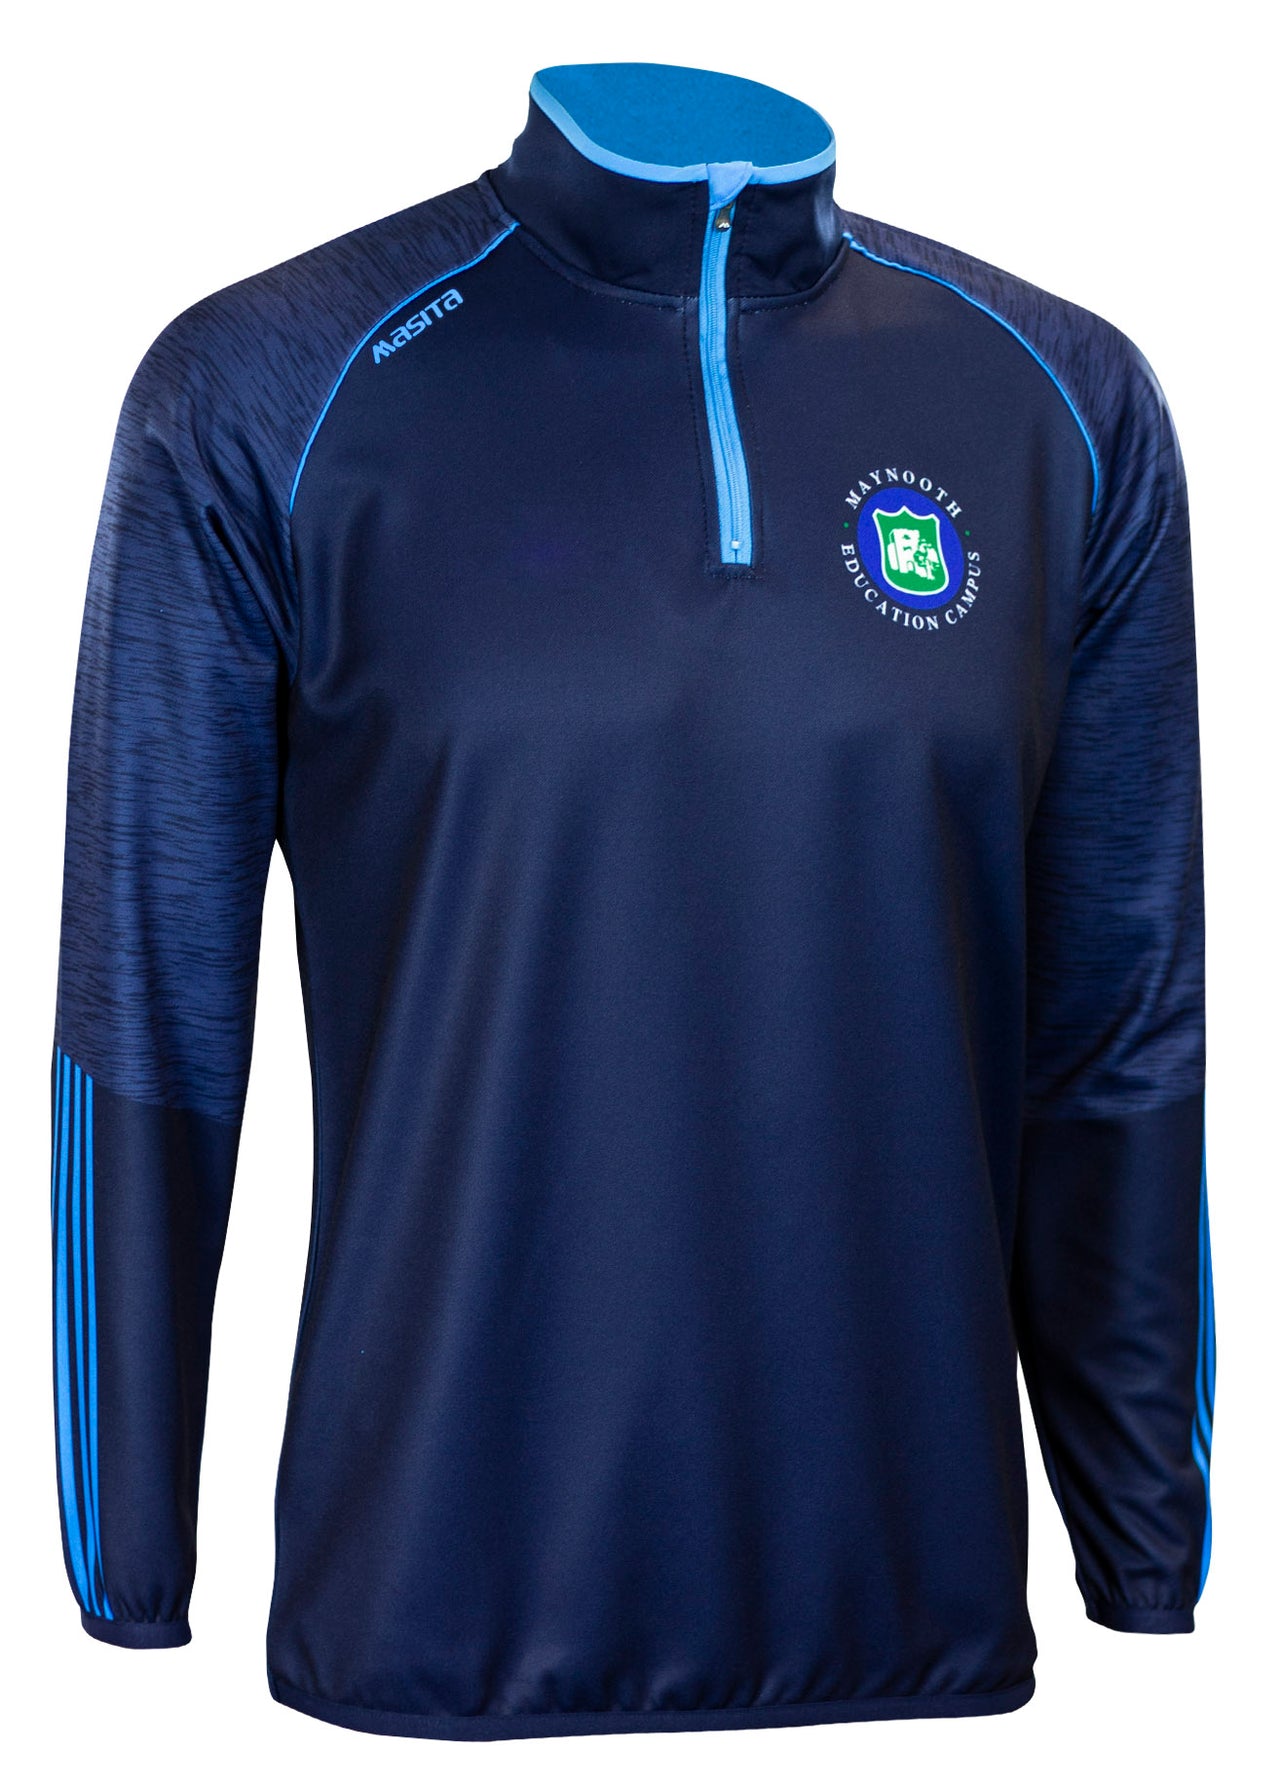 Maynooth Education Campus Quarter Zip Adults